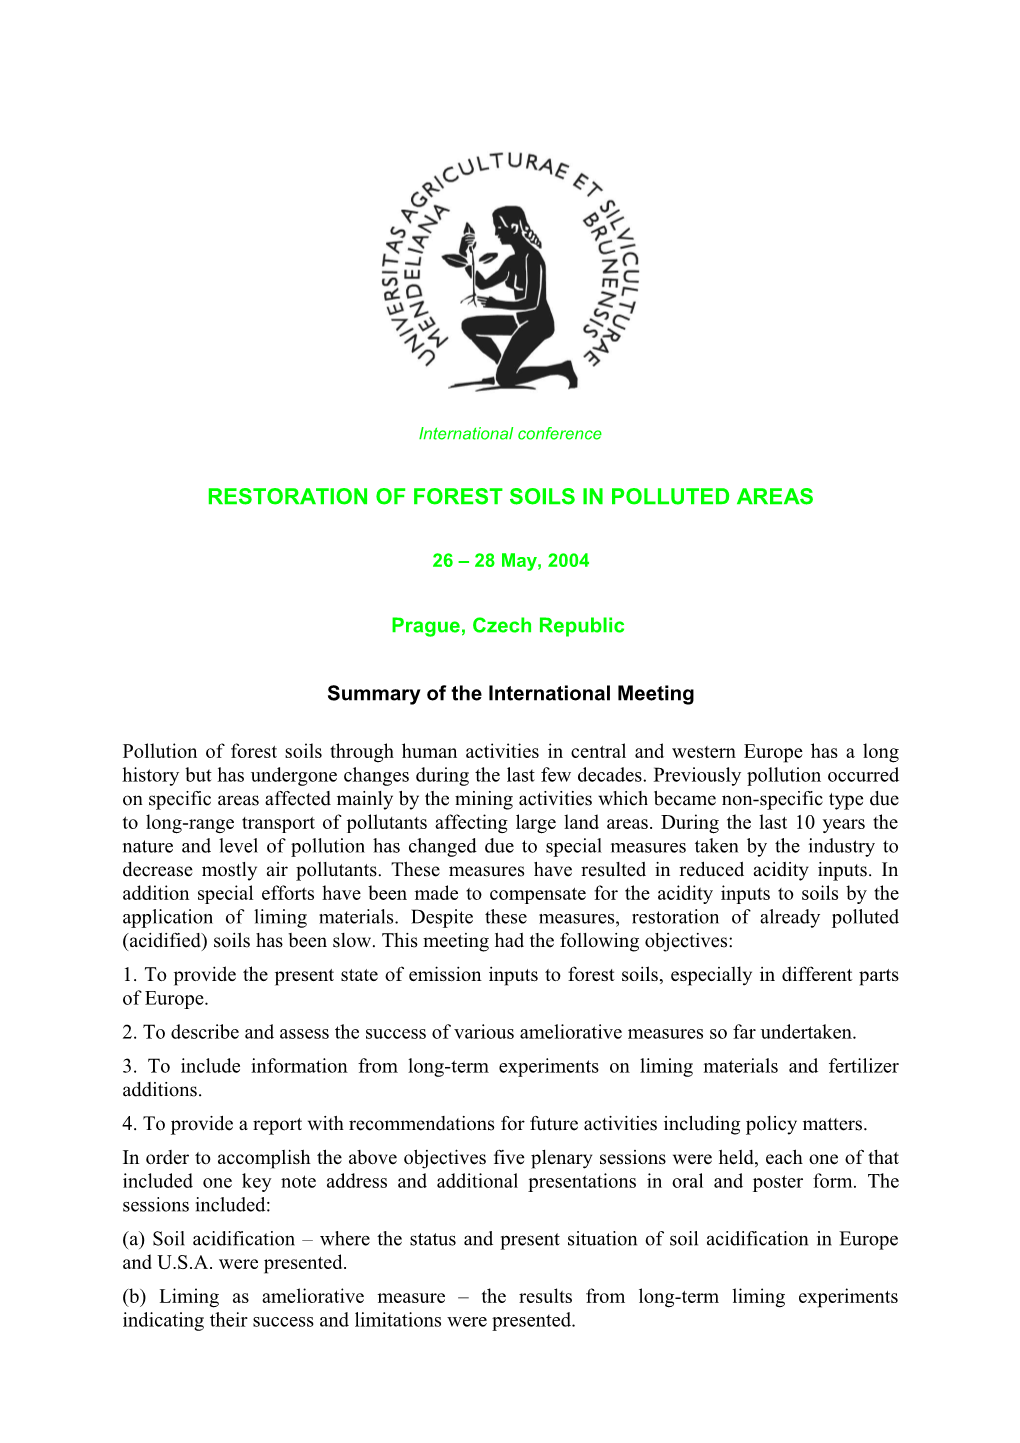 Summary of the International Meeting on Restoration of Forest Soils in Polluted Areas Organised